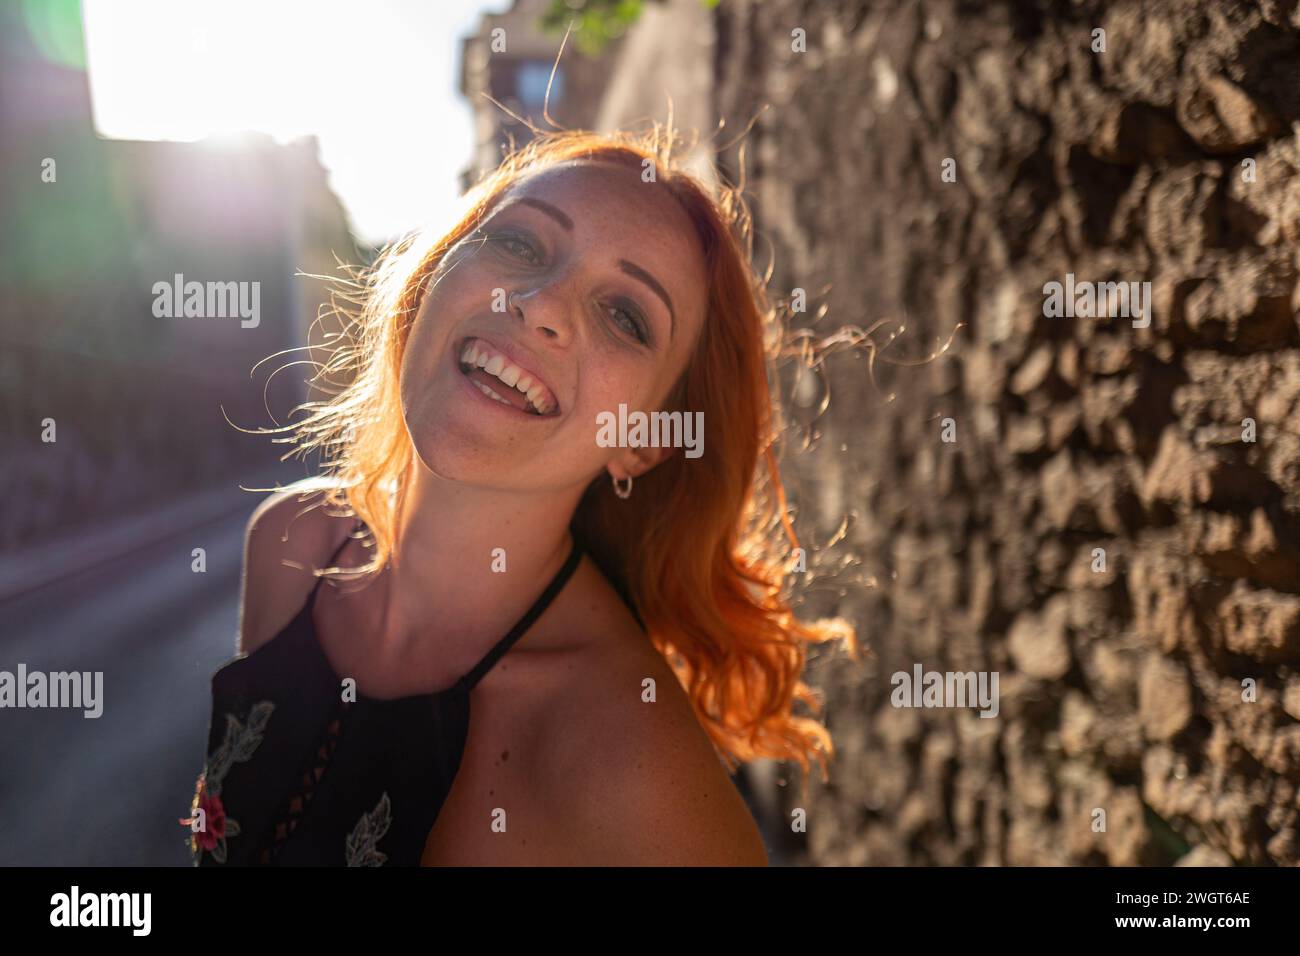 Young woman with red hair, laughing, Rome, Italy Stock Photo